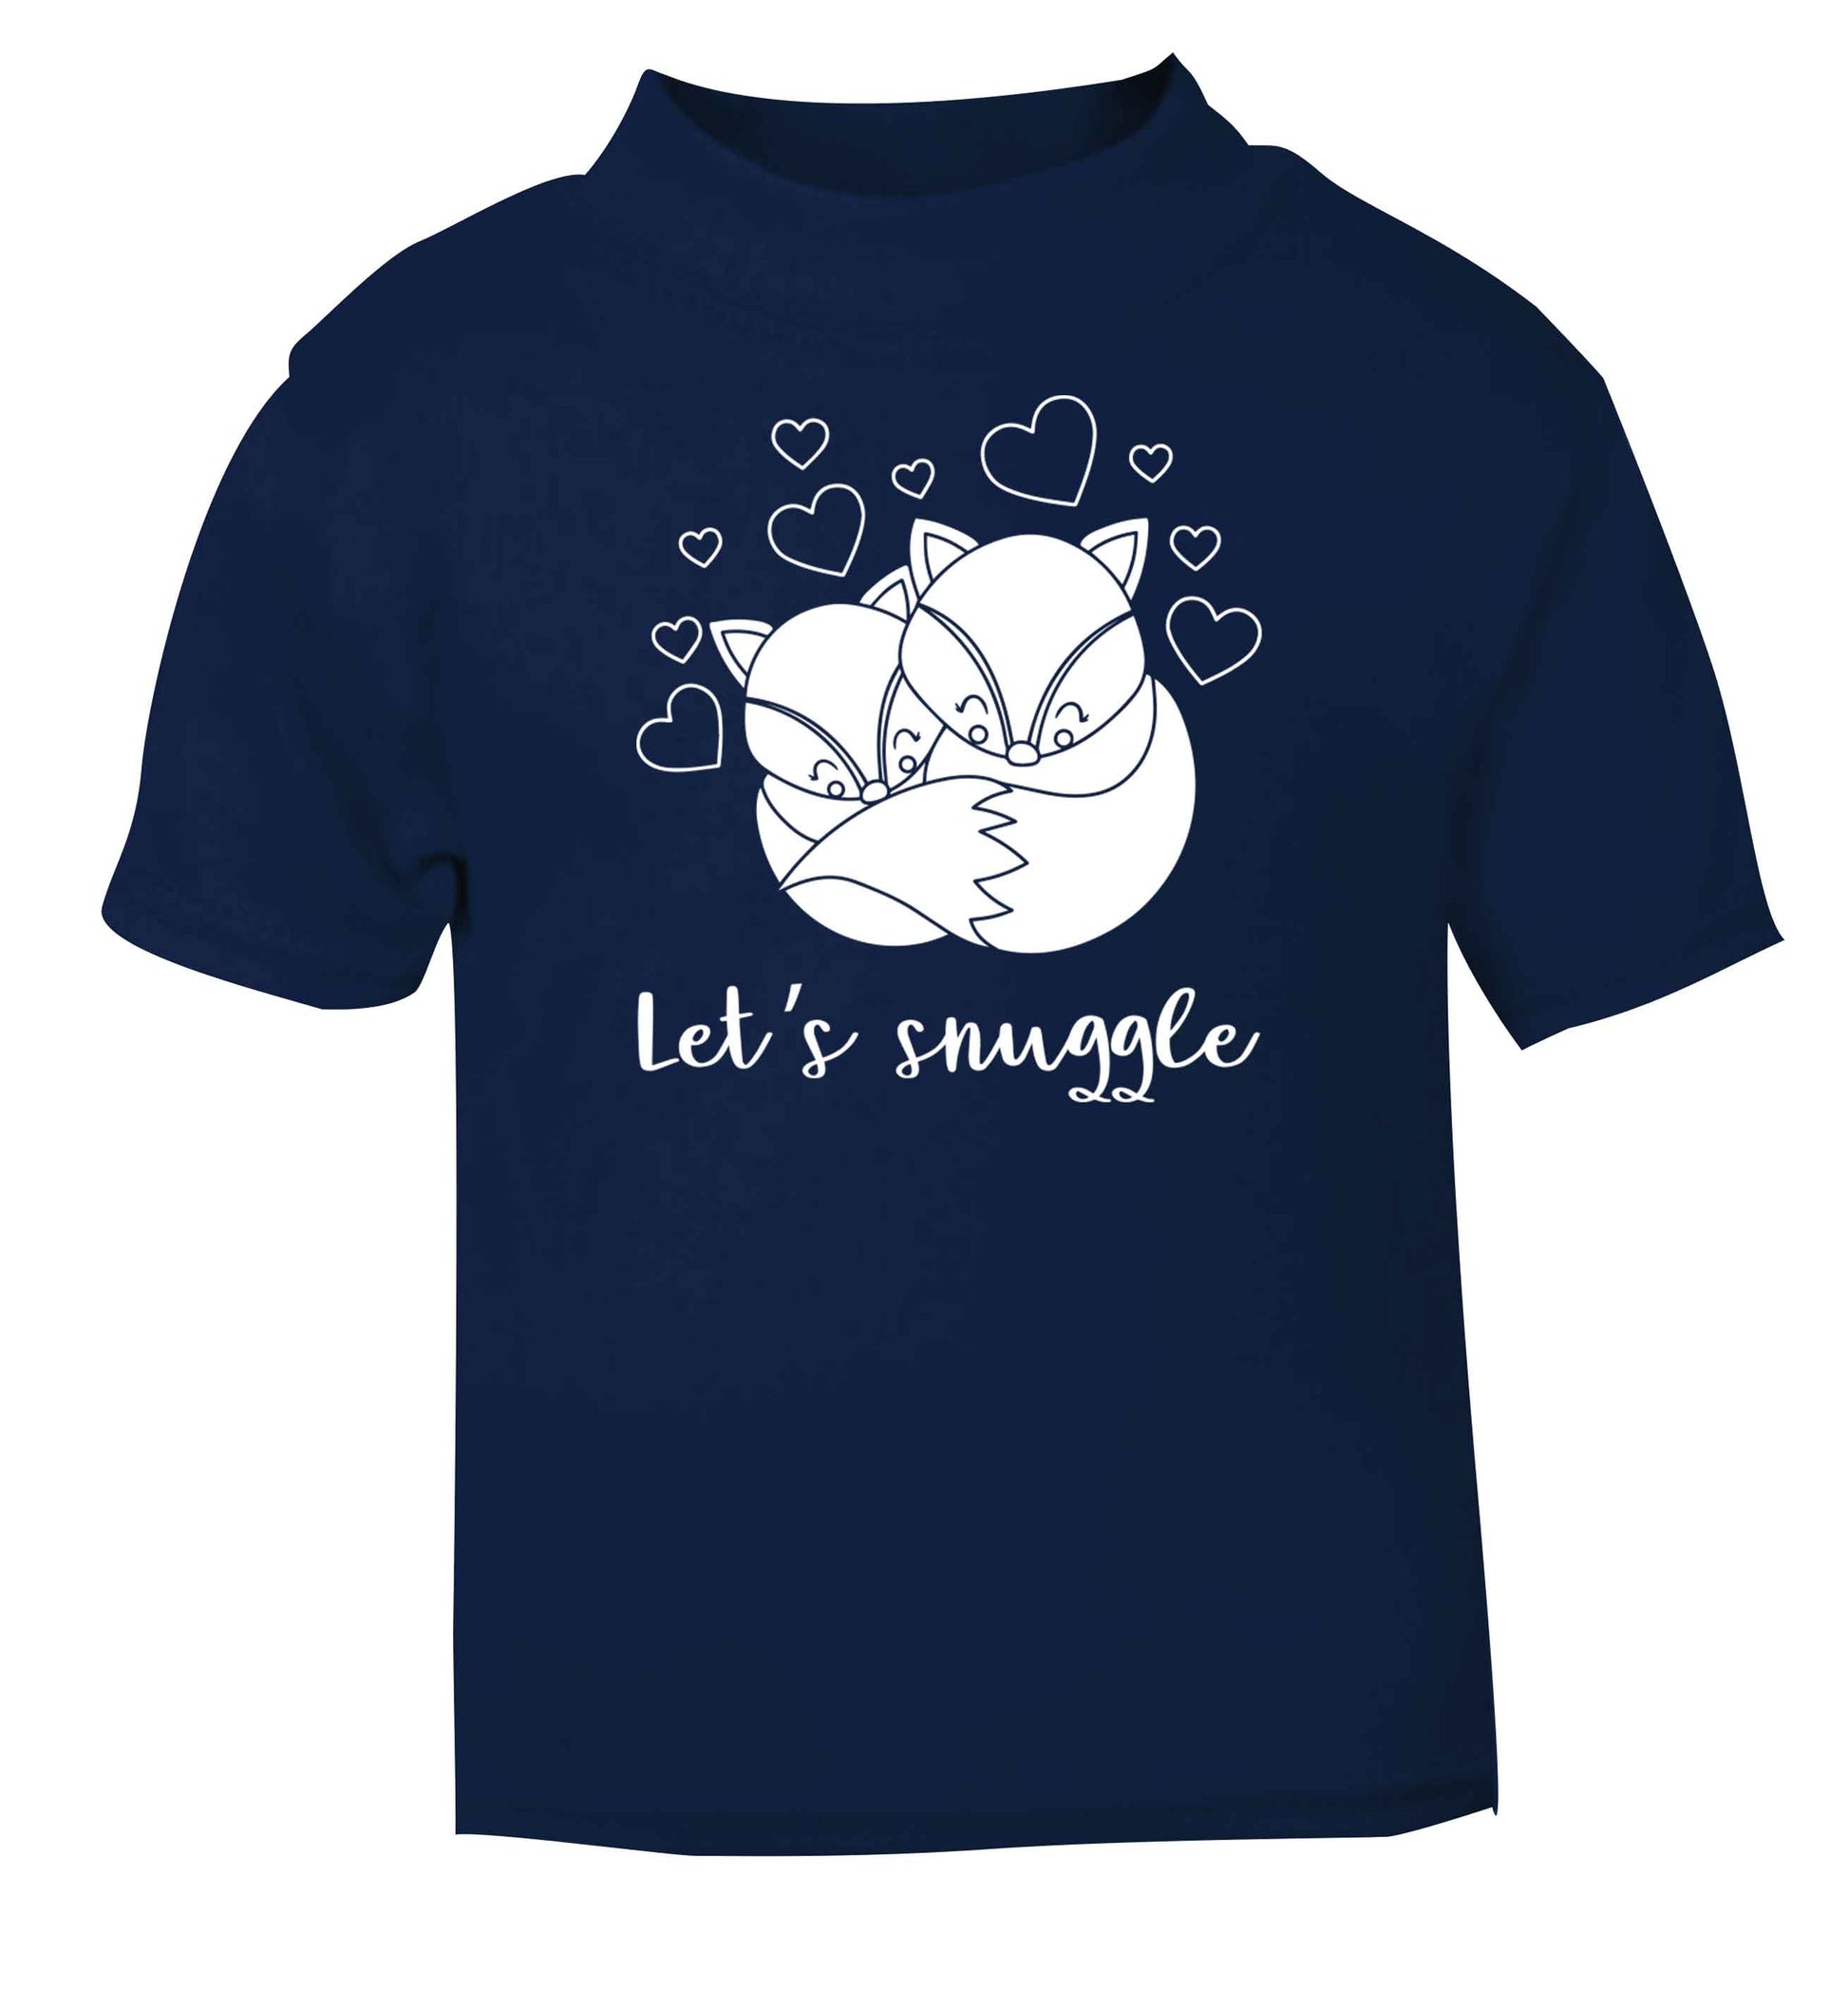 Let's snuggle navy baby toddler Tshirt 2 Years